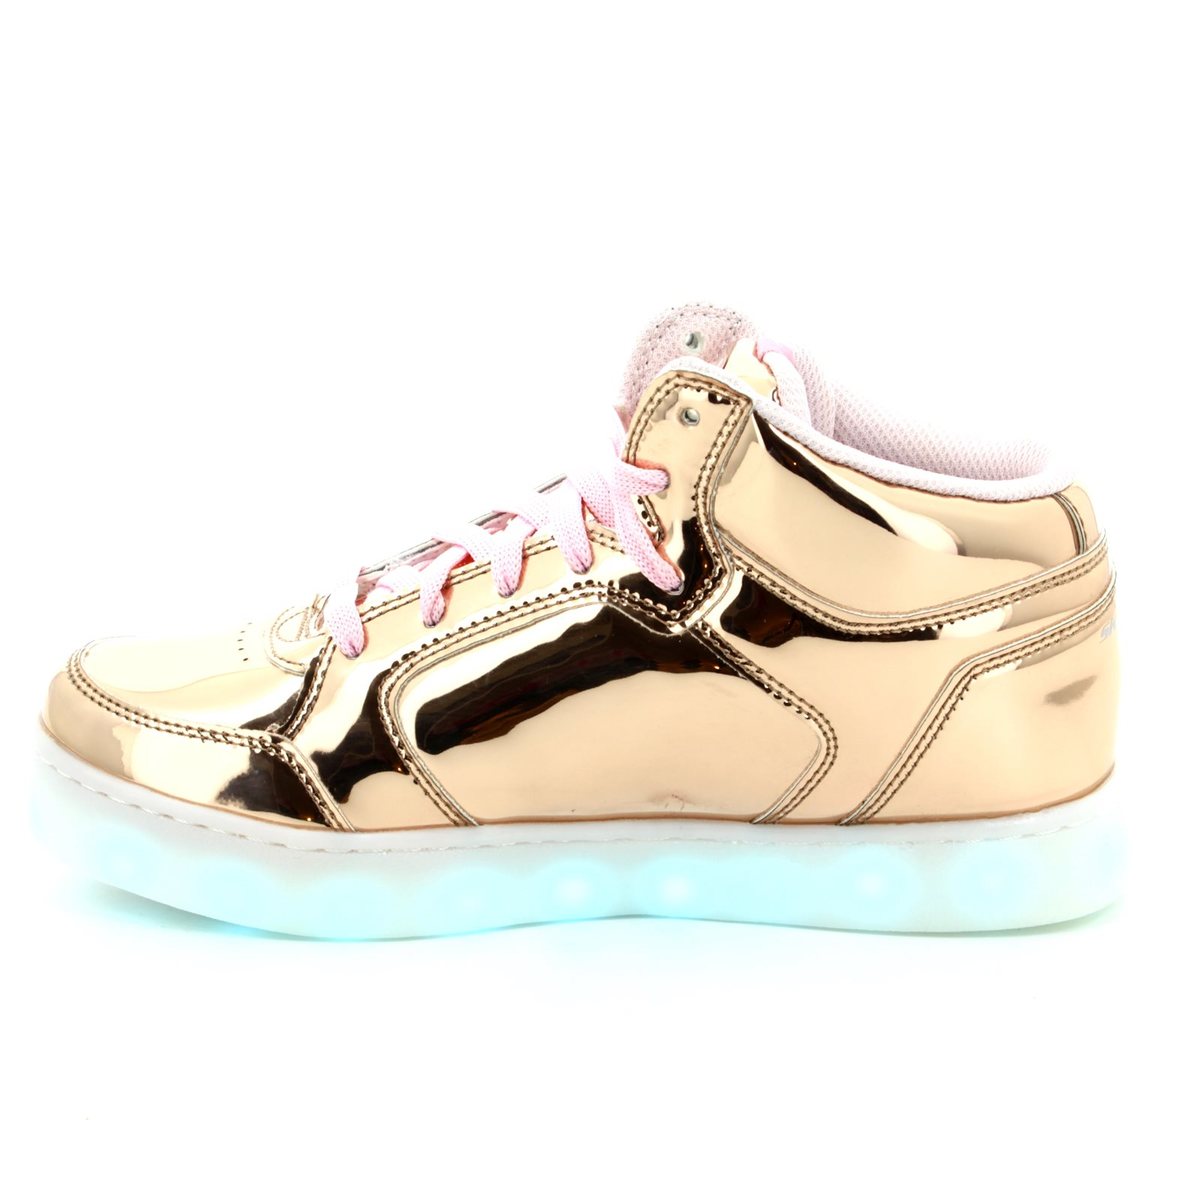 Energy Lights RSGD Rose gold everyday shoes